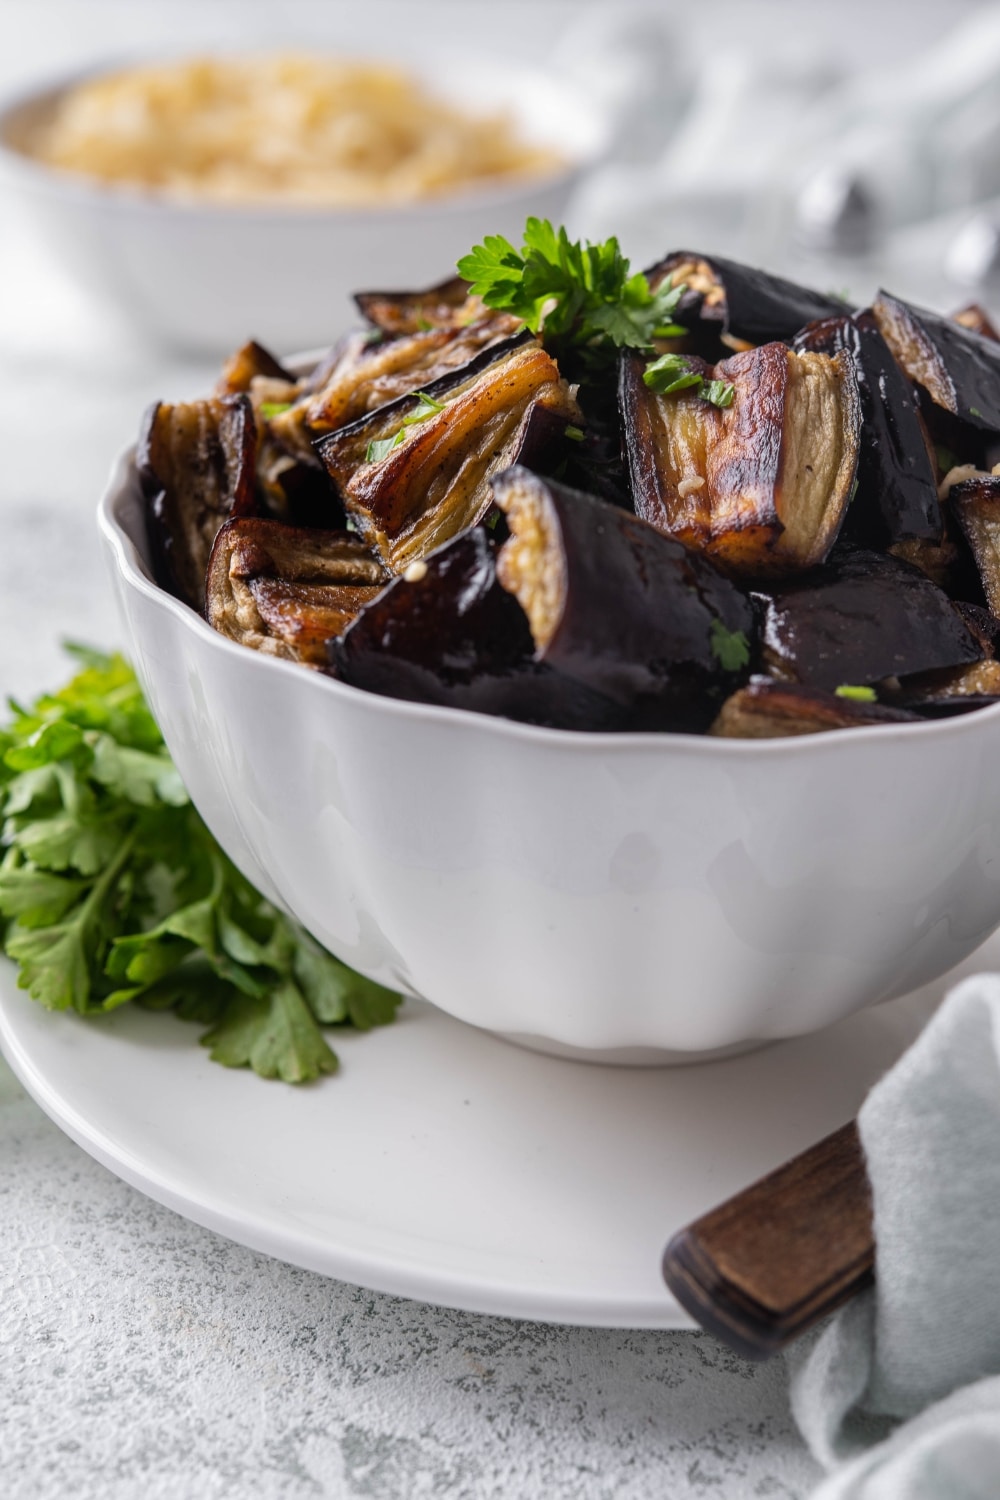 Roasted eggplant garnished with fresh parsley in a white bowl set over a plate.